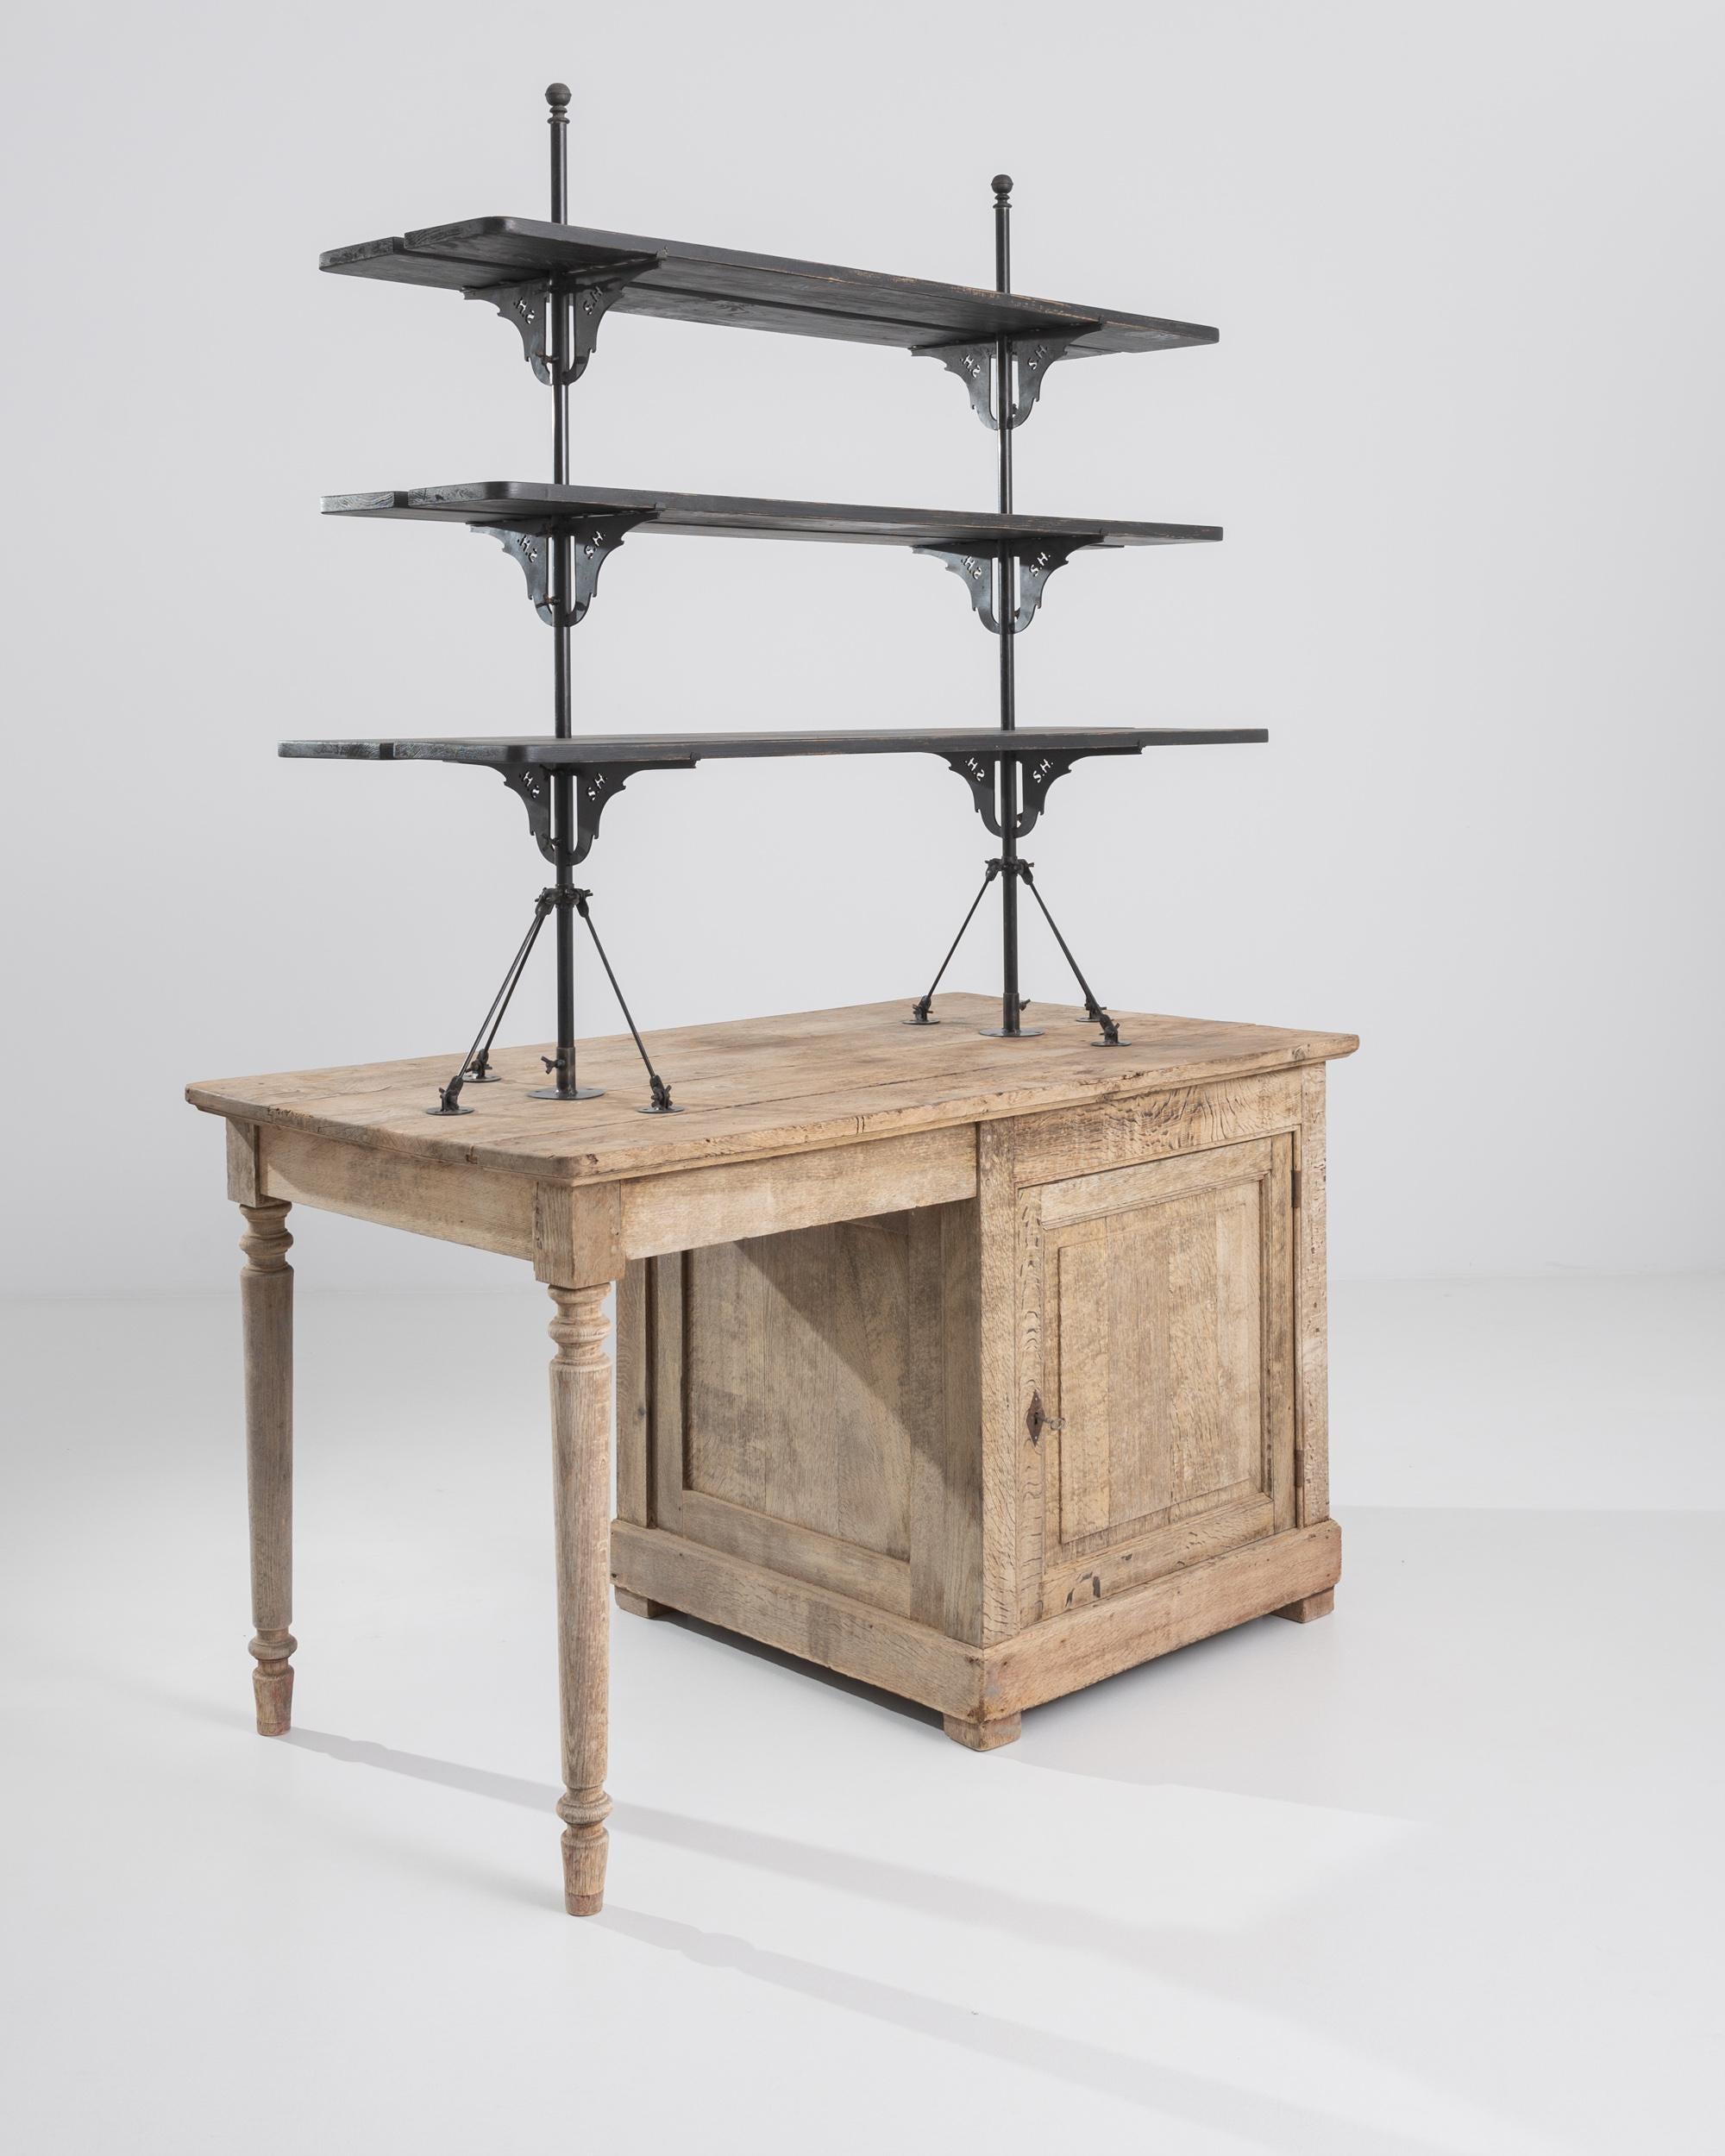 A 19th century bleached oak display cabinet from France. This cabinet consists of a large lower cabinet, upon which sits three top shelves. Its upper shelves extend above the wooden structure like masts on a ship, displaying a moody and unique